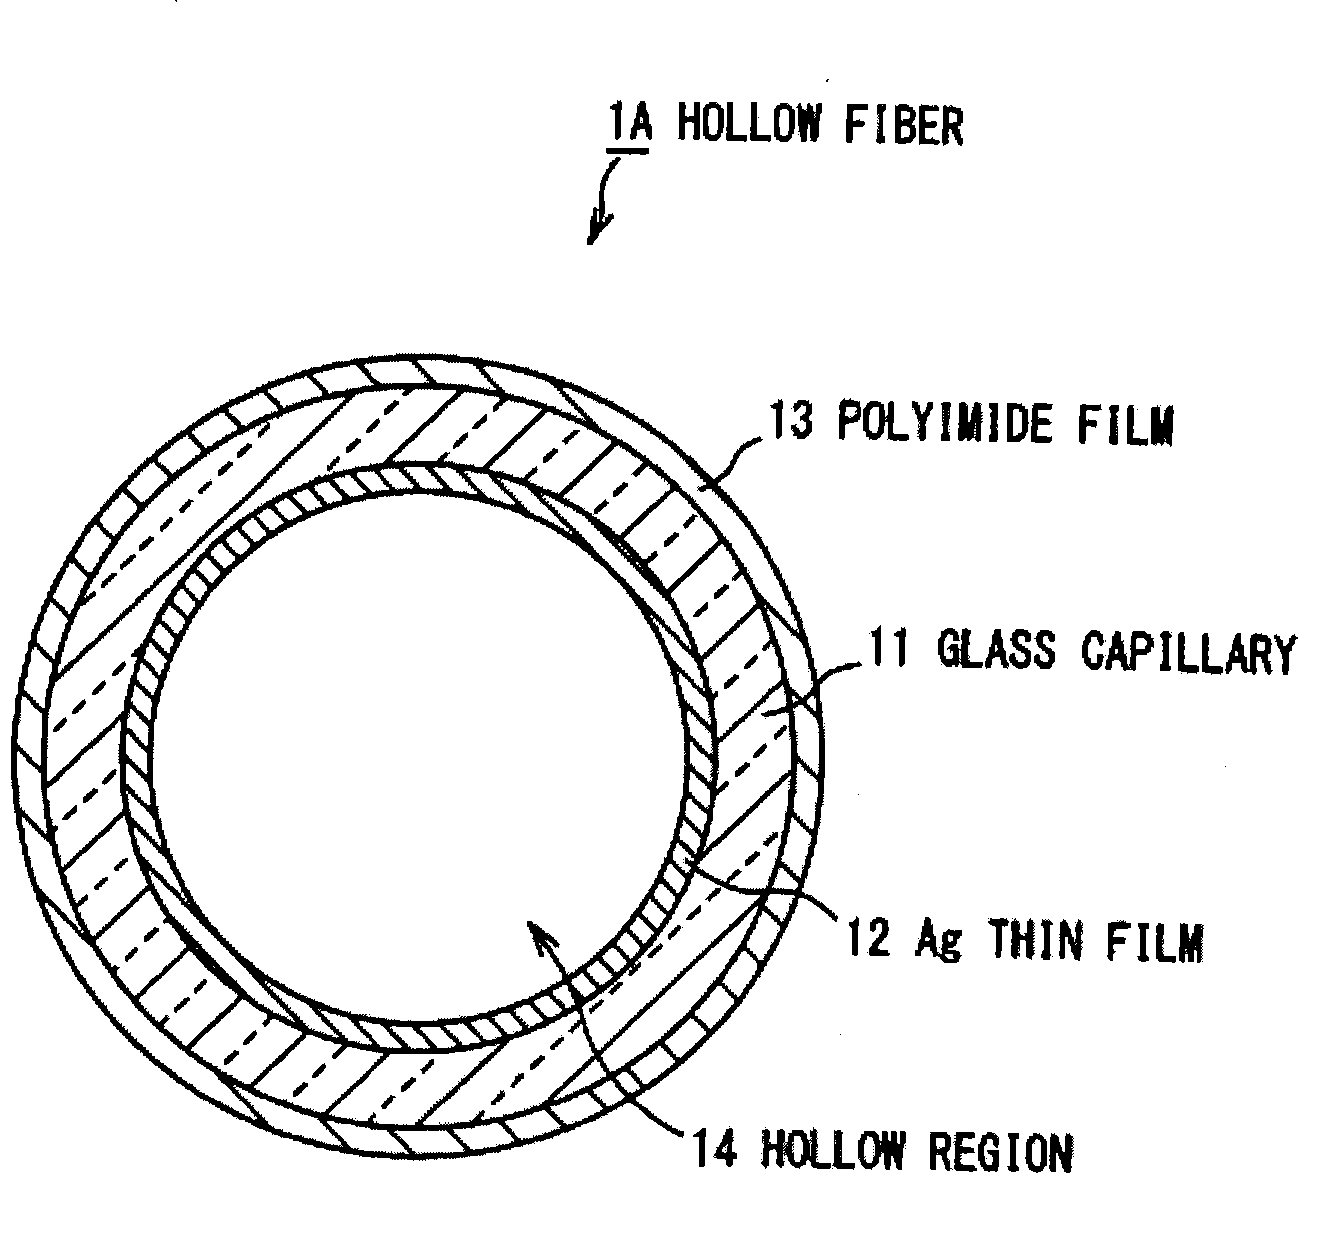 Hollow fiber and method for fabricating same